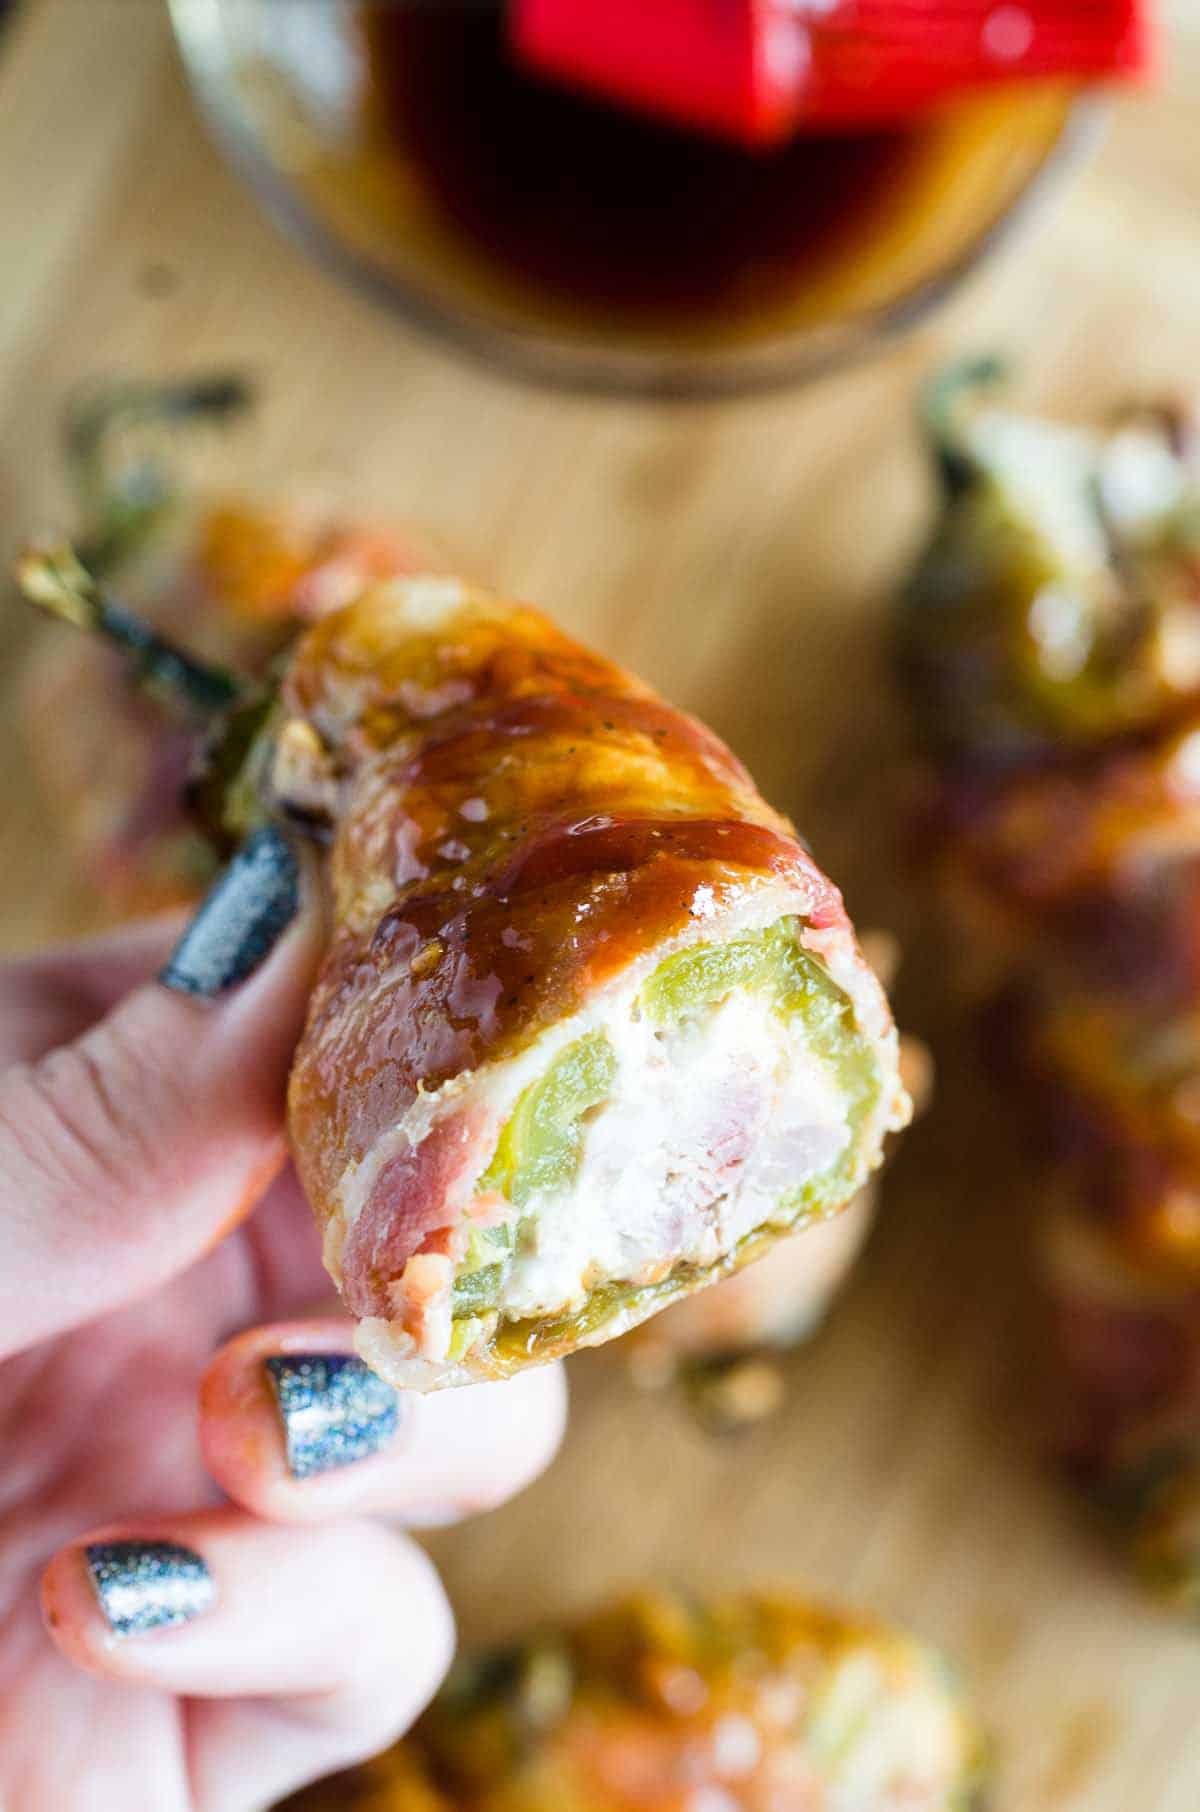 holding a cream cheese and brisket stuffed jalapeno wrapped in bacon